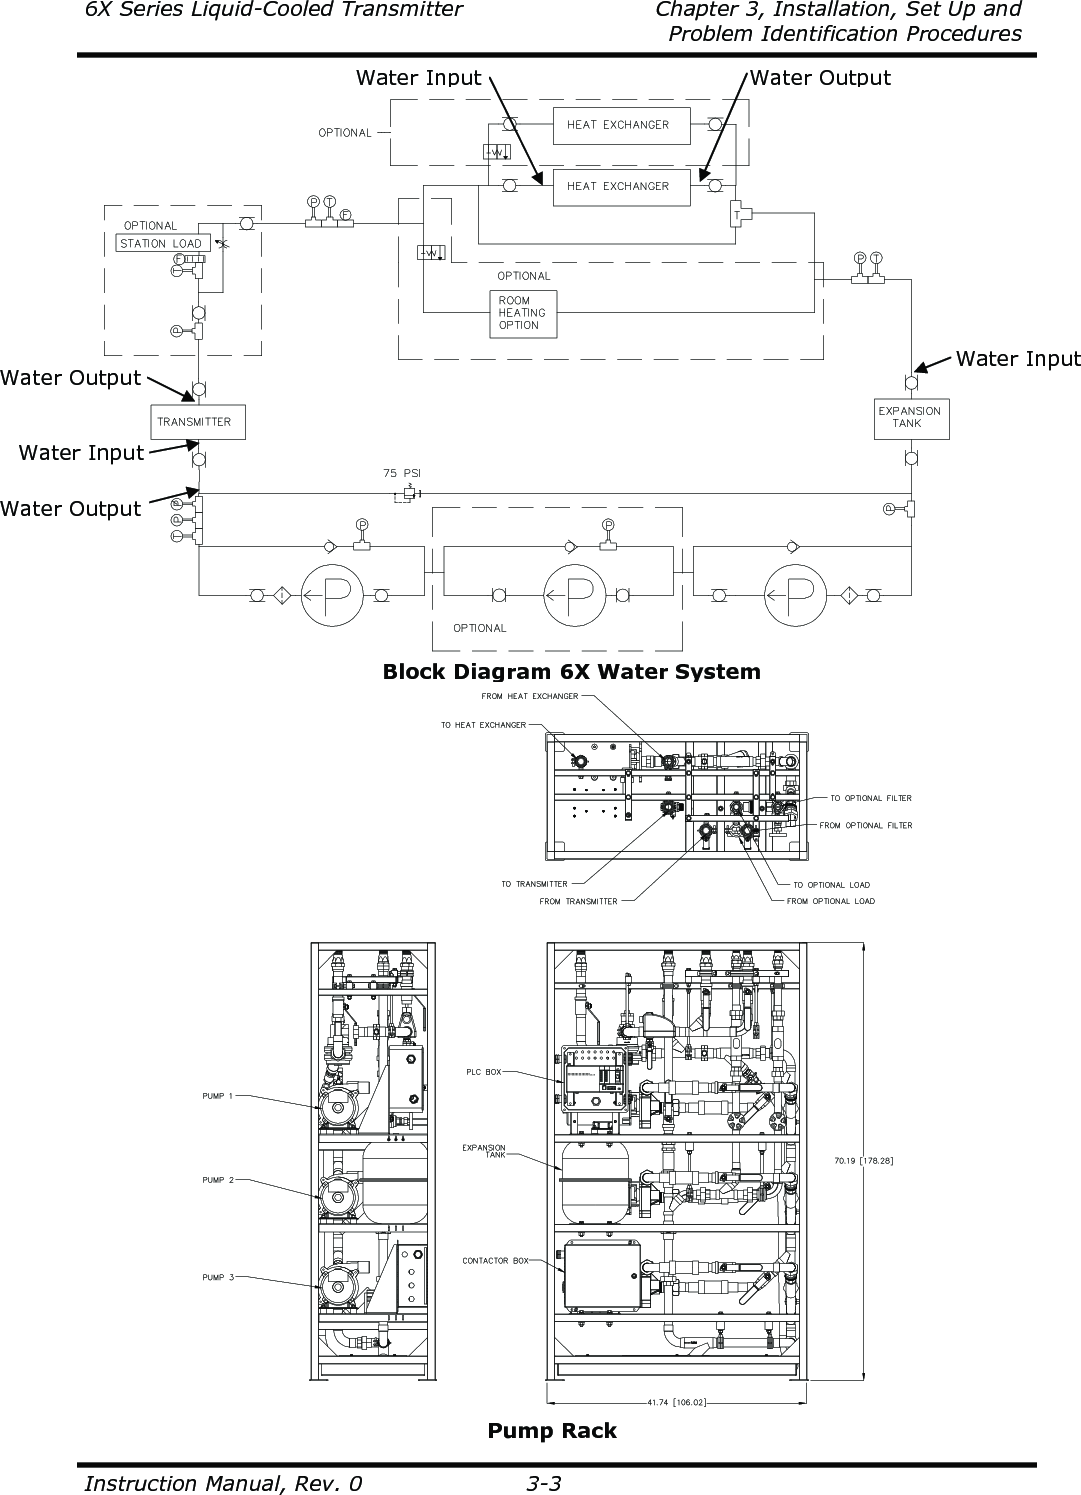 6X Series Liquid-Cooled Transmitter    Chapter 3, Installation, Set Up and     Problem Identification Procedures  Instruction Manual, Rev. 0  3-3    Block Diagram 6X Water System Water Input Water Output Water Output Water Input Water Input Water Output Pump Rack 